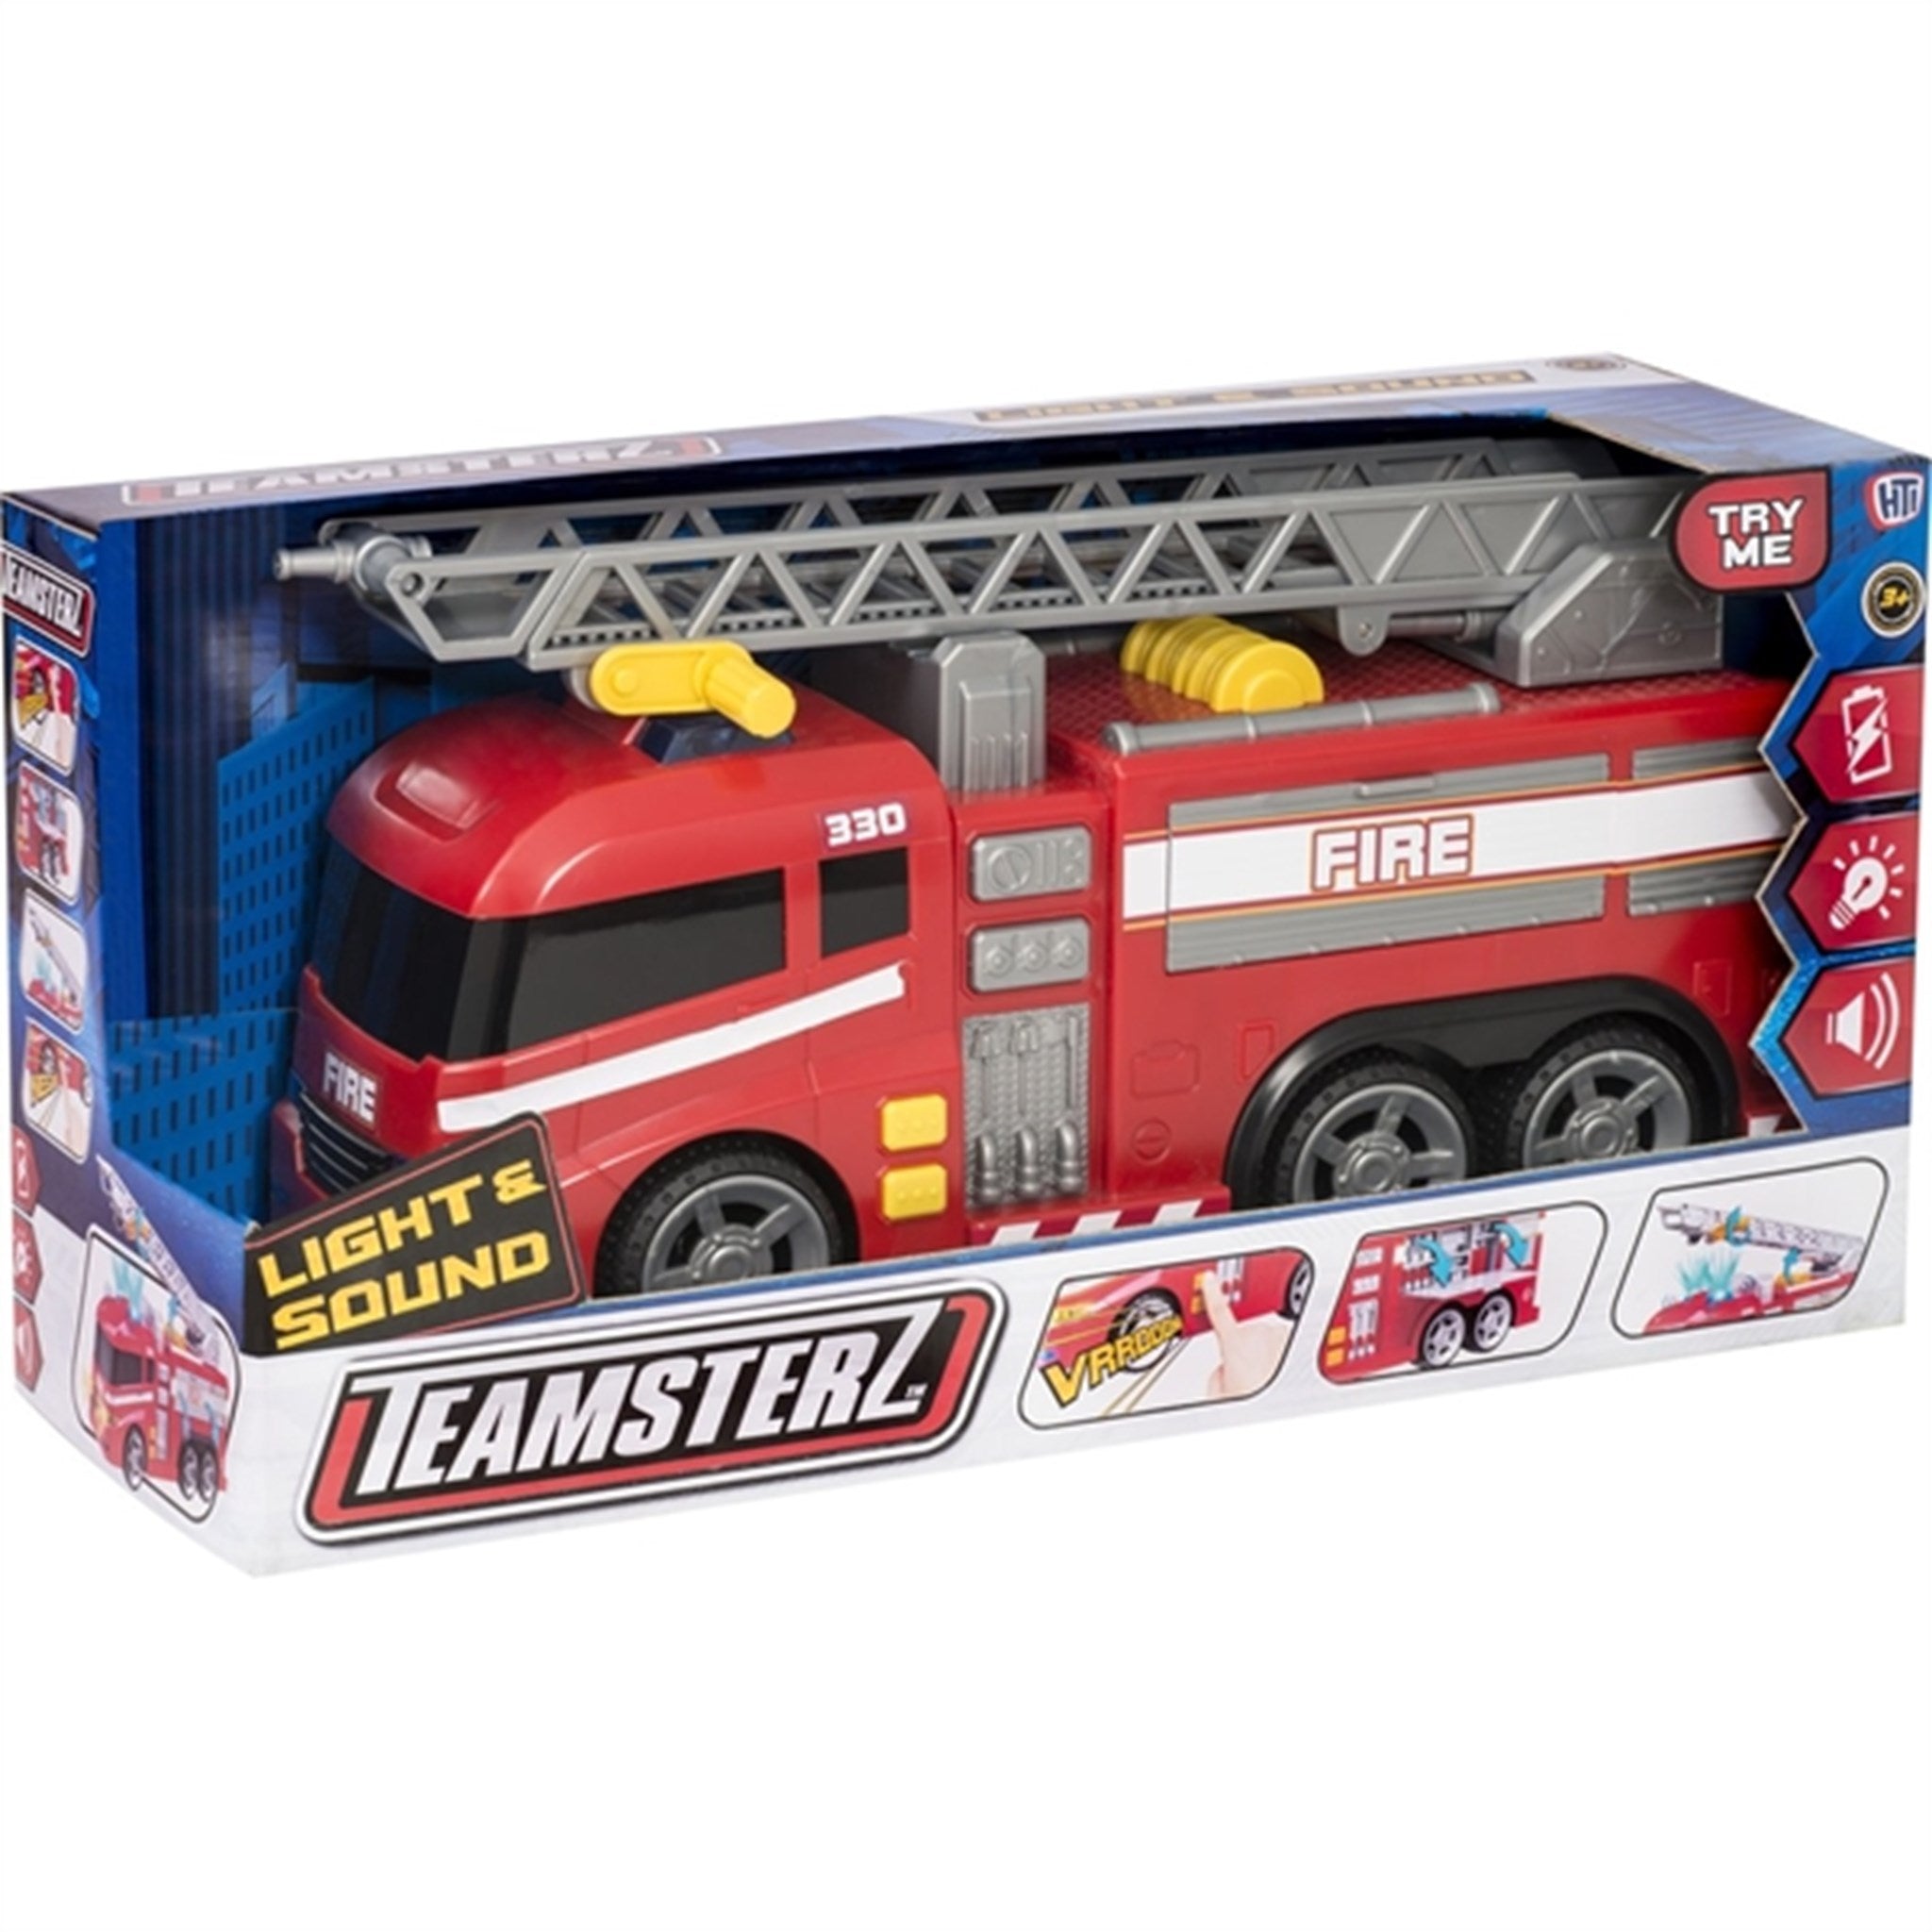 Teamsterz Large L&S Fire Engine 2